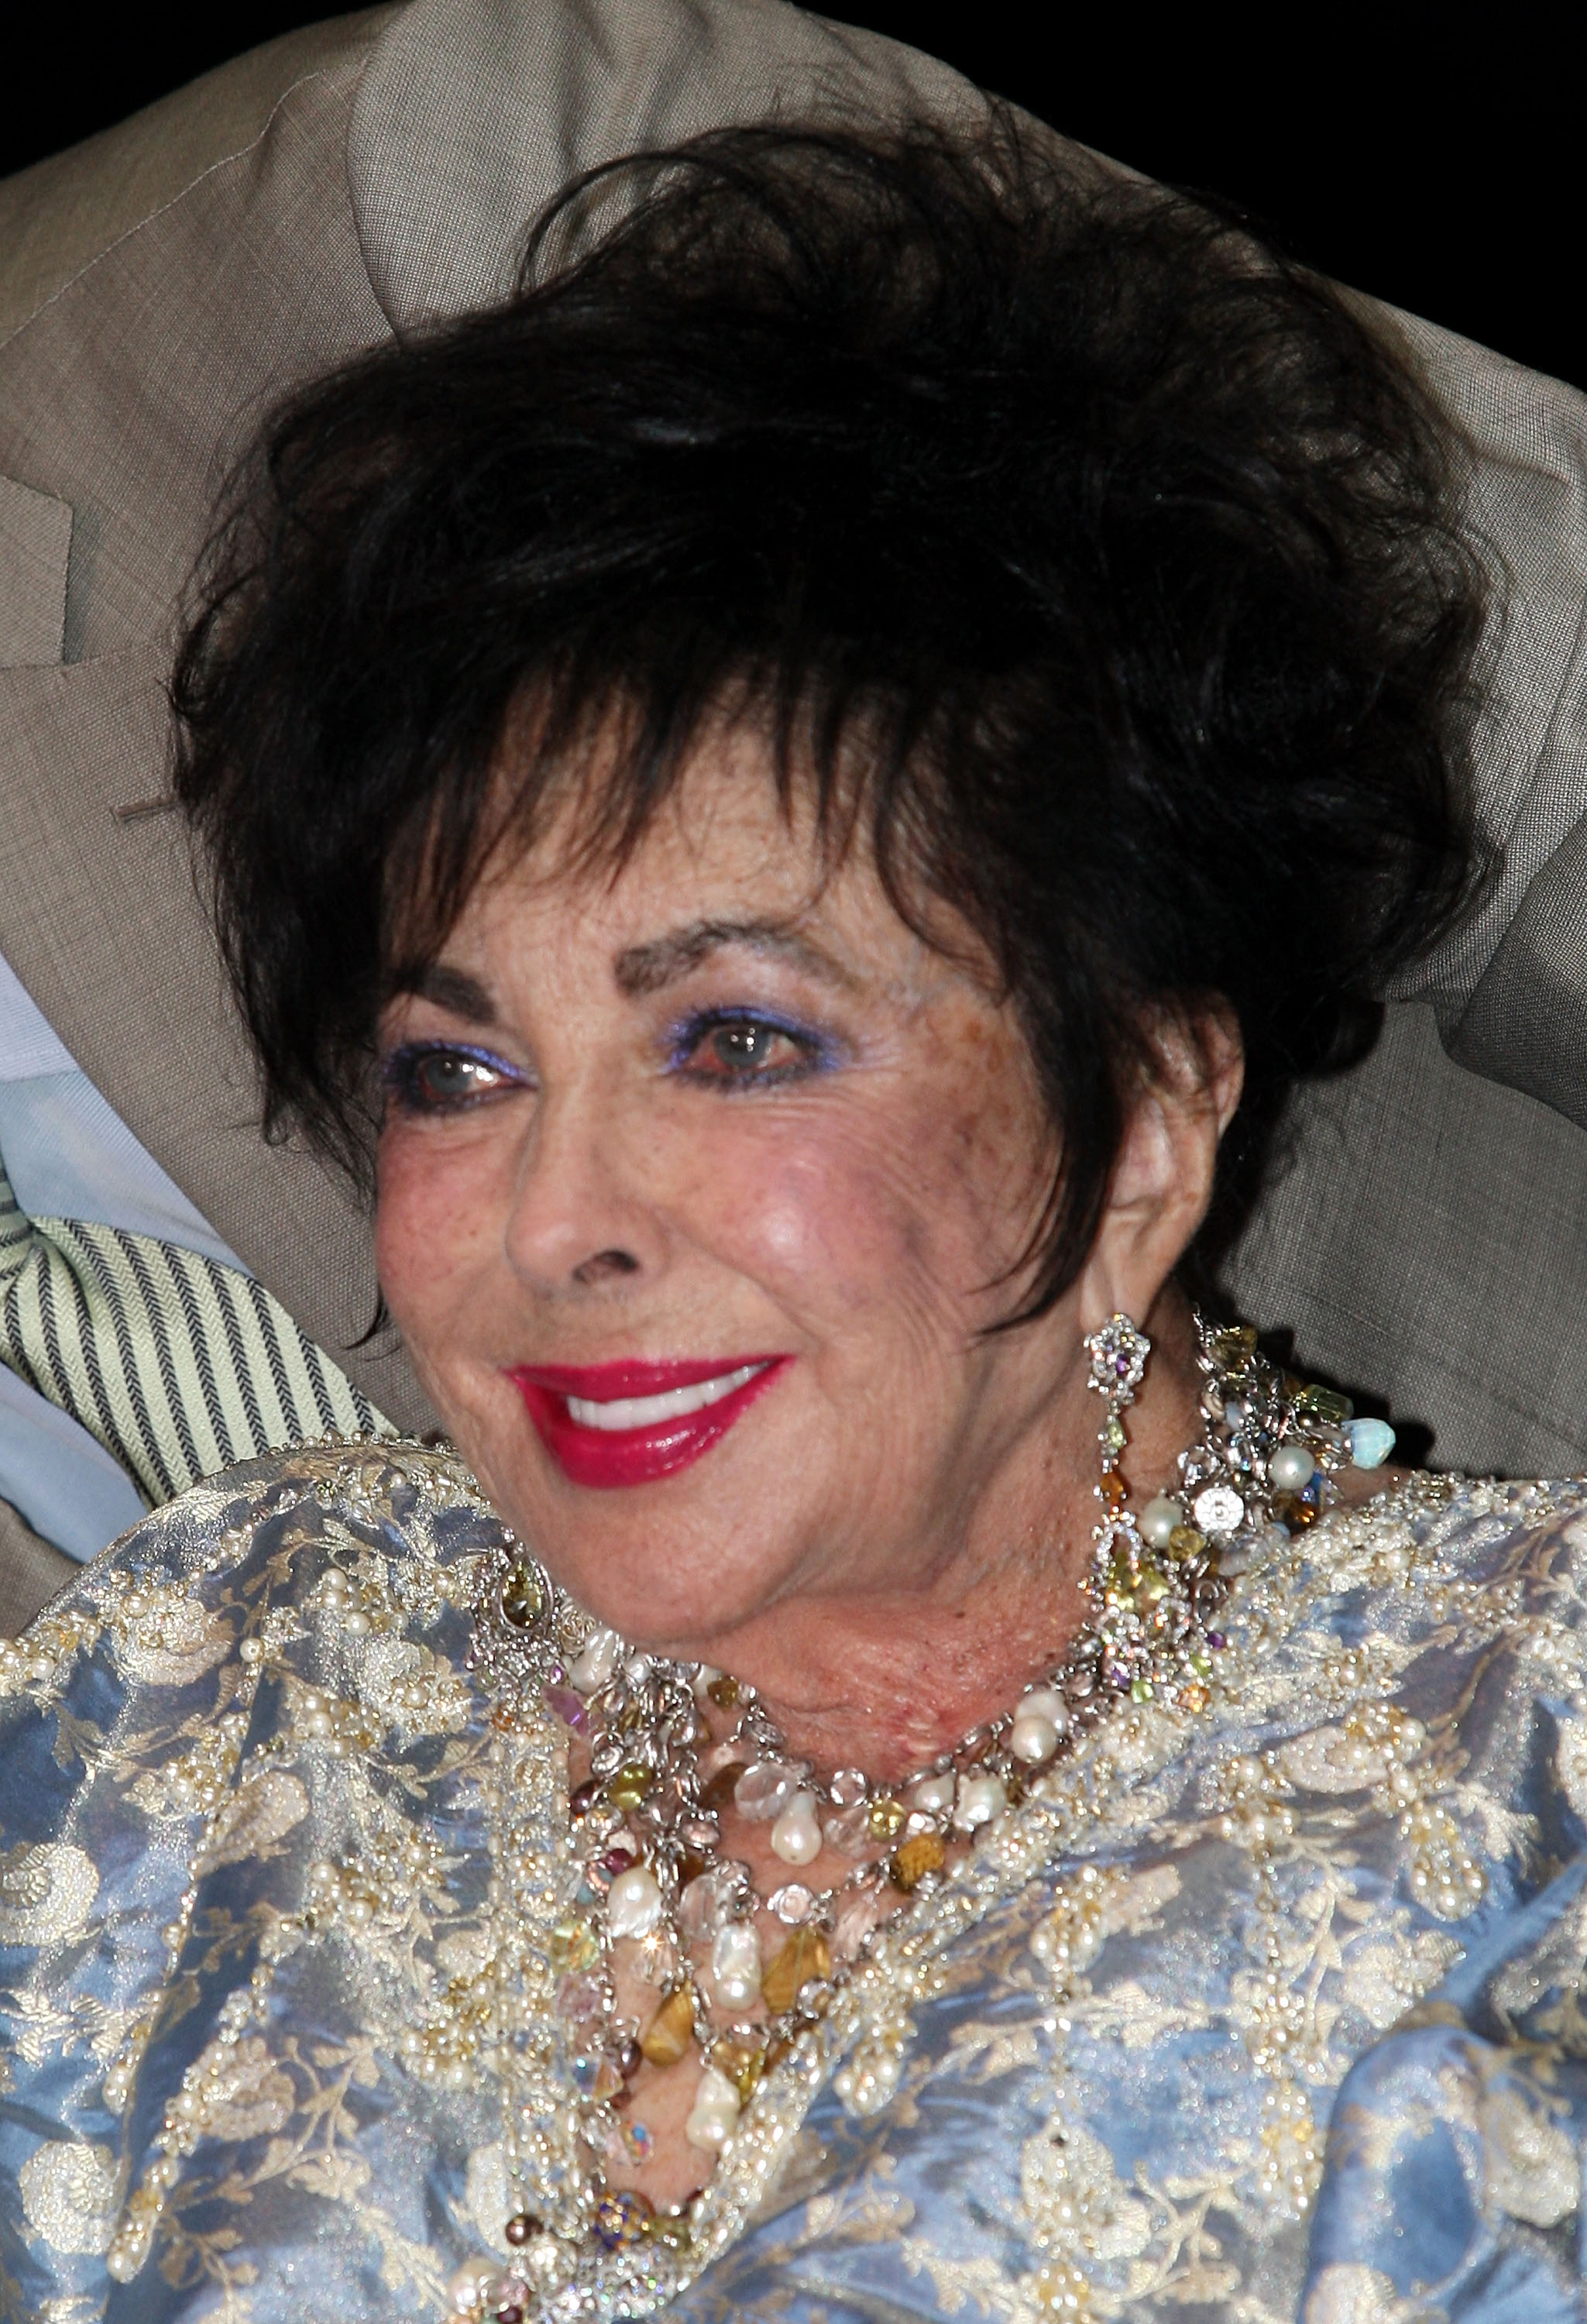 Elizabeth Taylor attends the 27th annual Macy's Passport benefit at the Barker Hangar on September 24, 2009, in Santa Monica, California. | Source: Getty Images